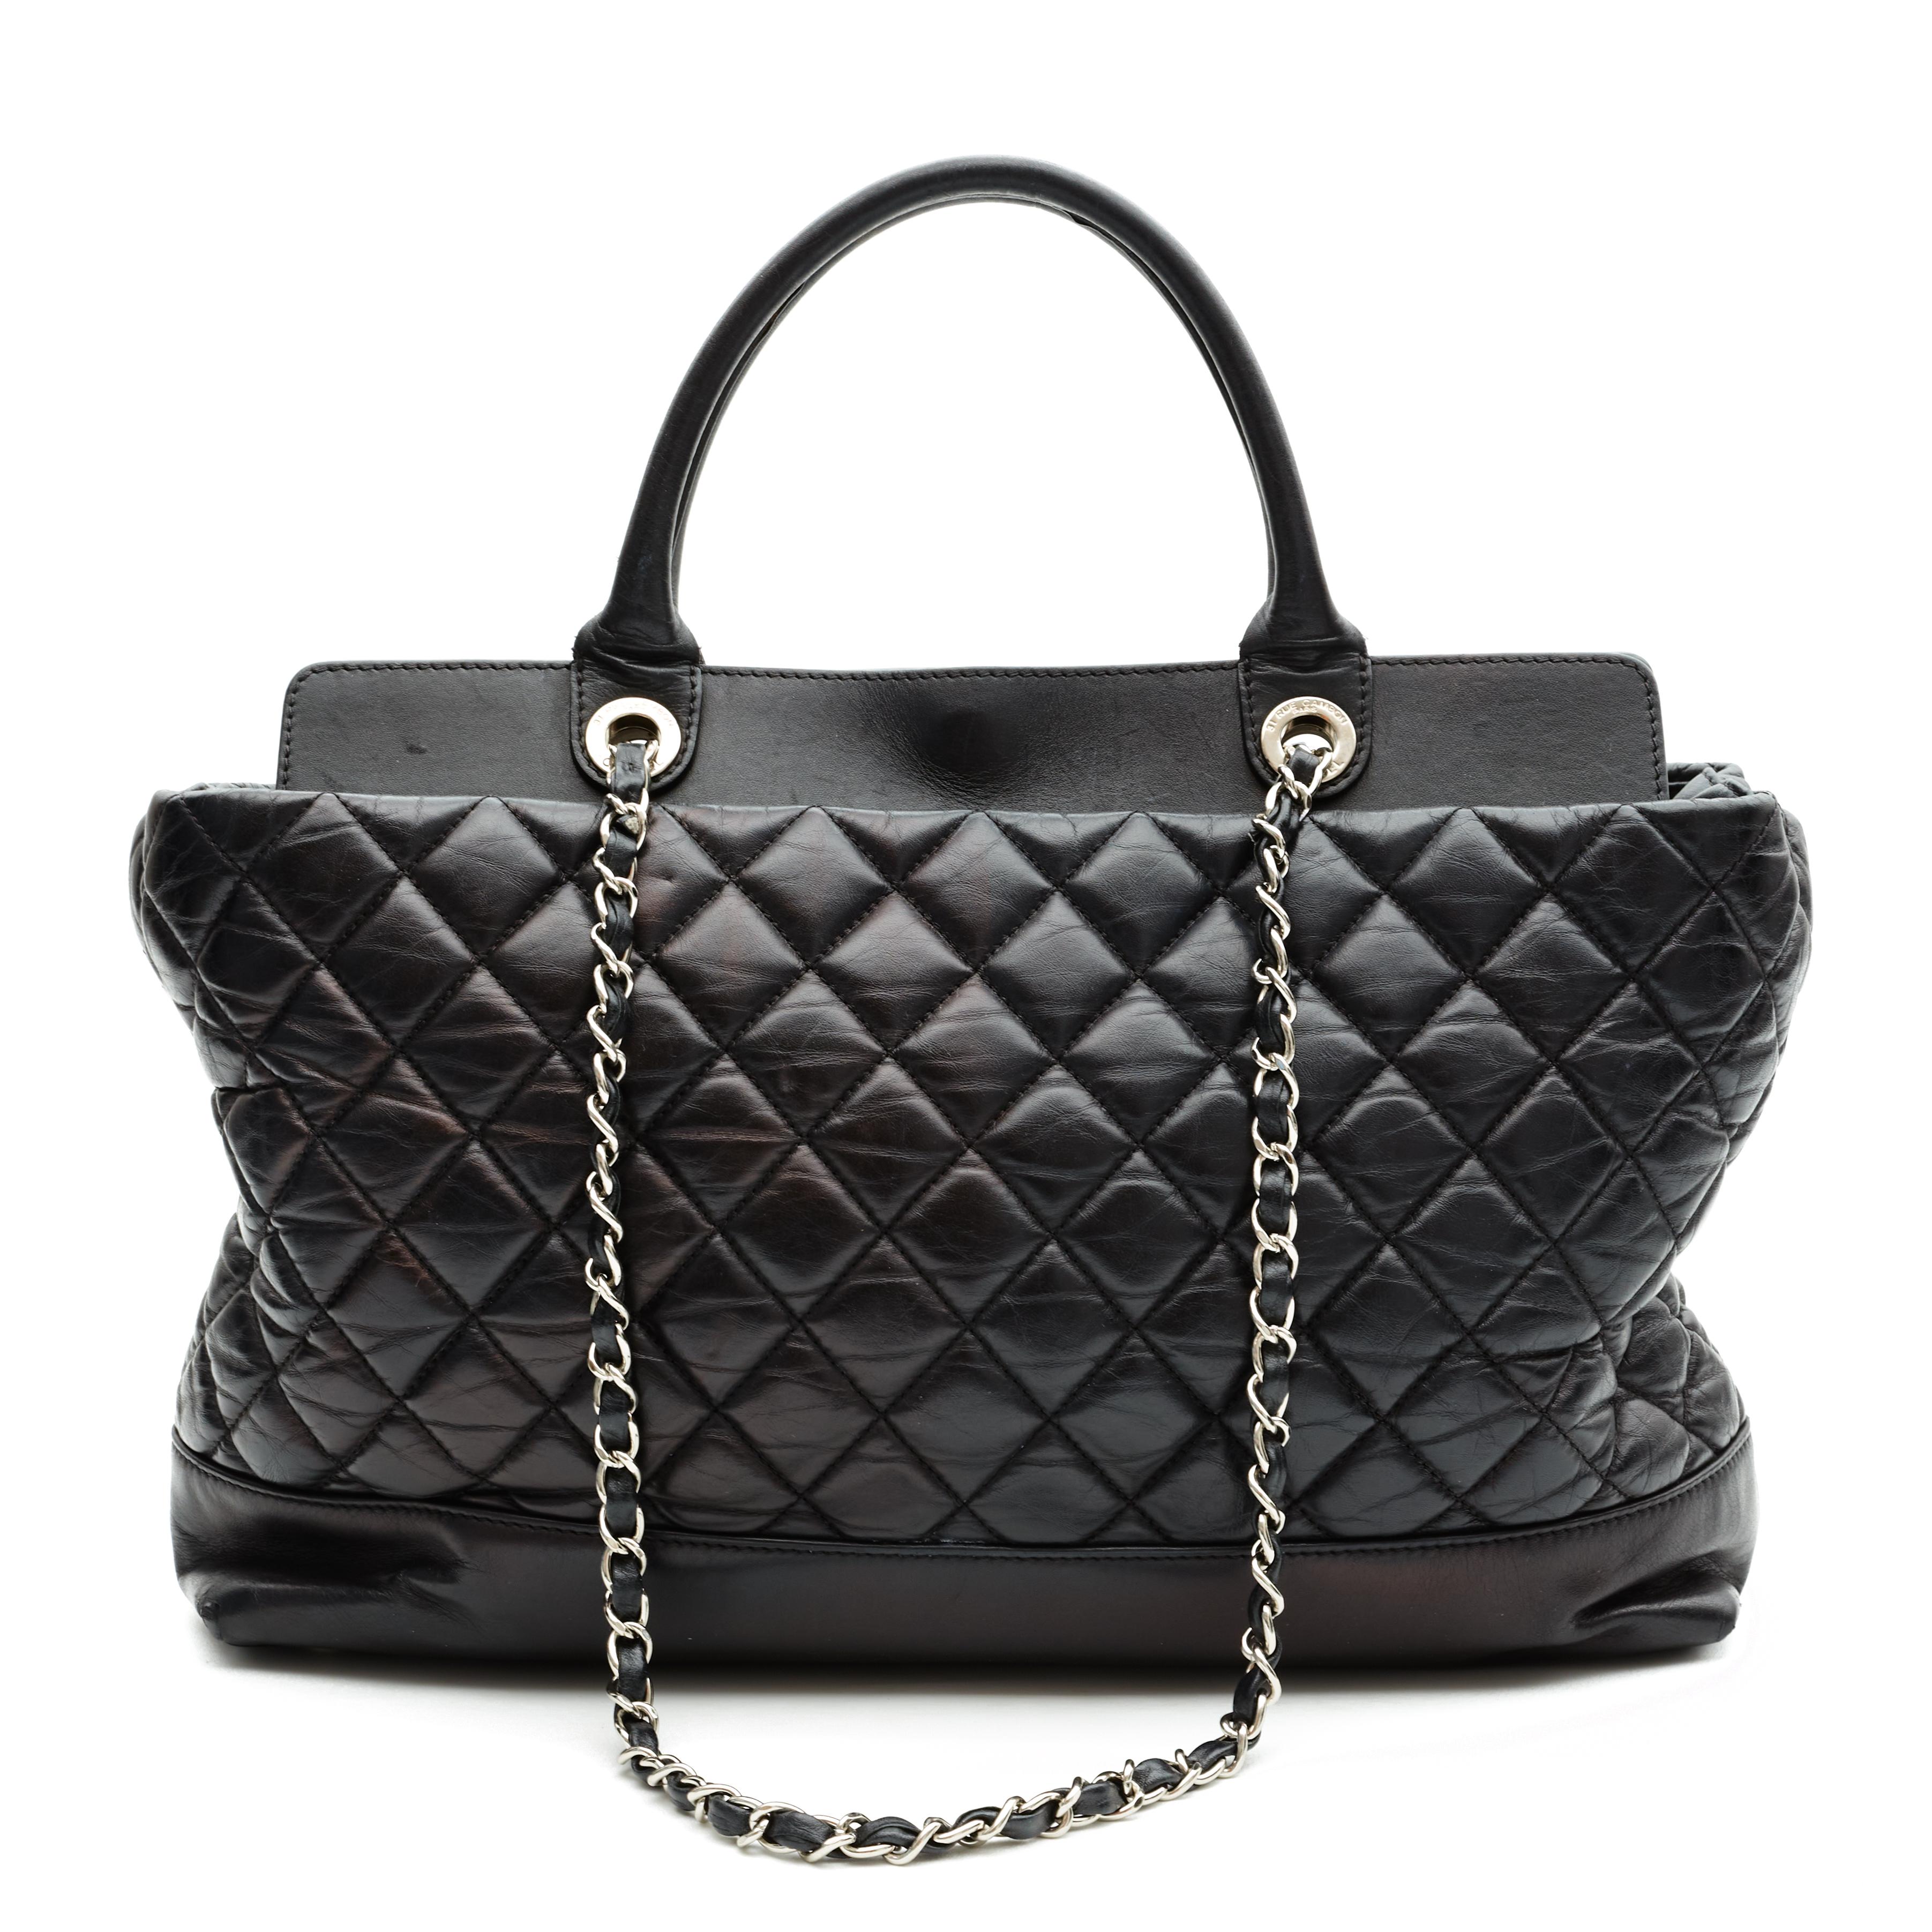 This Chanel shopping tote is made with black lambskin with diamond quilted stitching. The bag features dual rolled leather top handles, long shoulder chain interlaced with leather shoulder strap, CC turn lock closure, protective feet,  and a beige